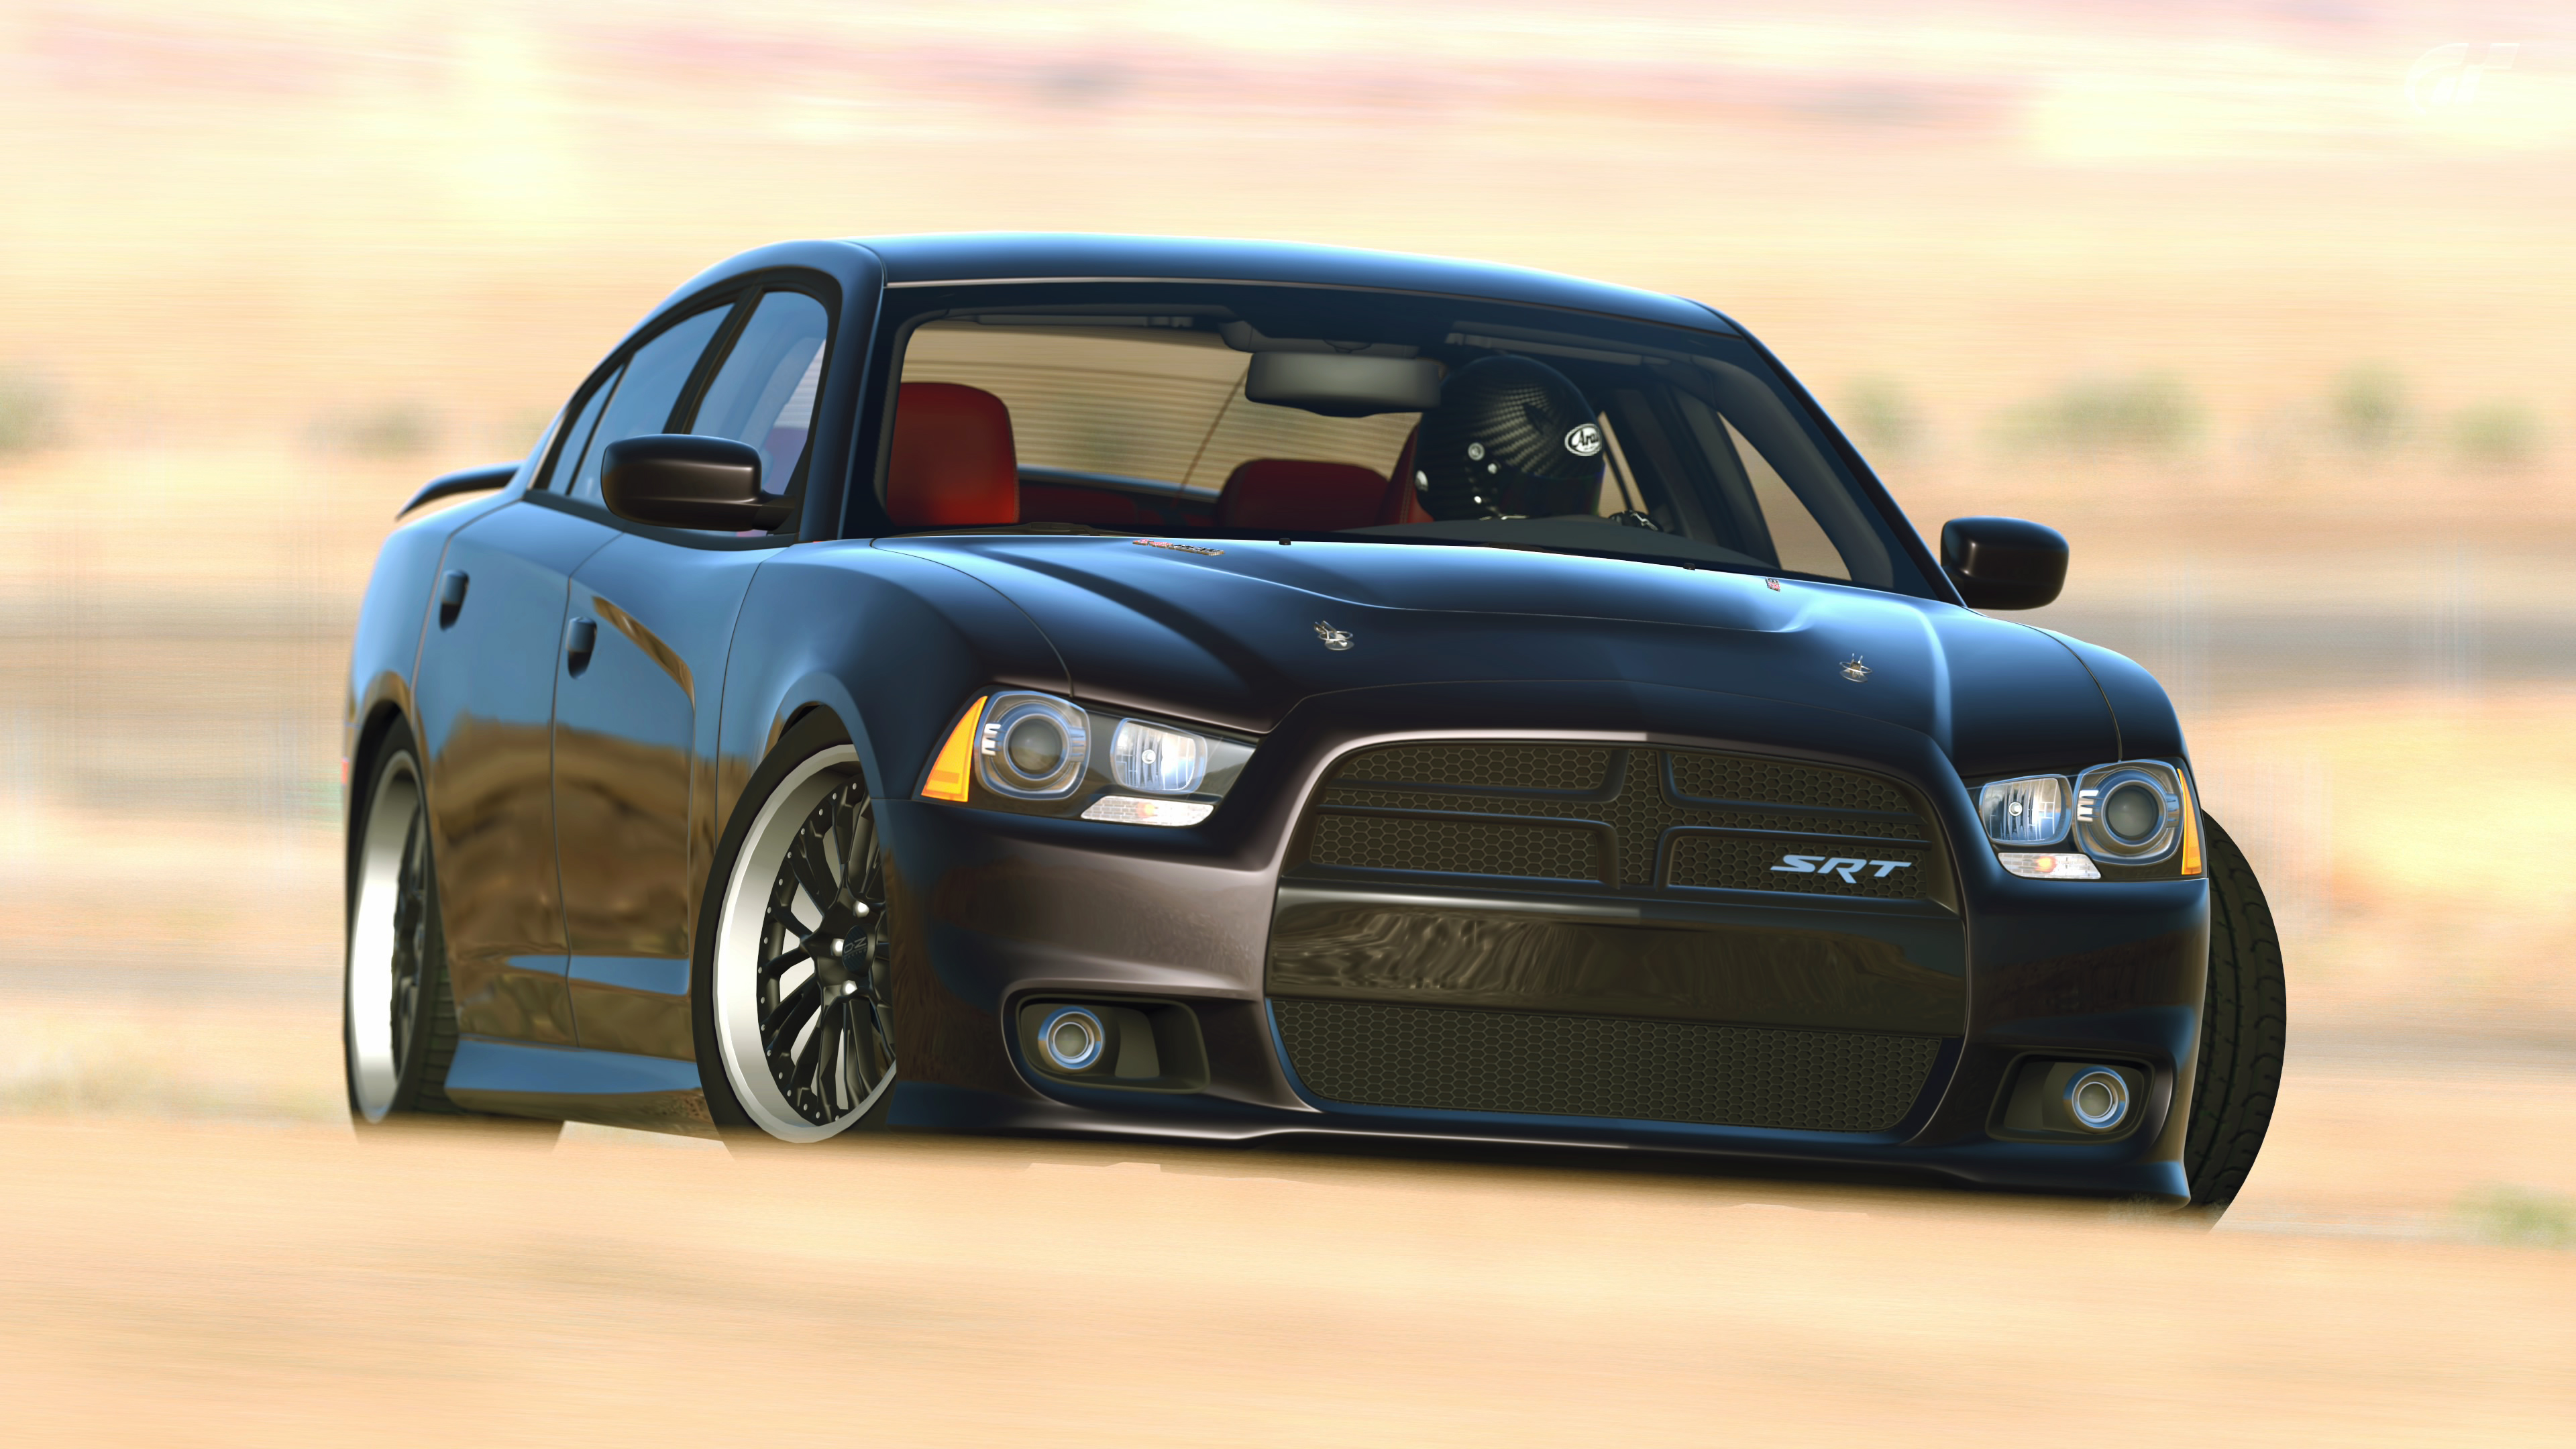 2011 Dodge Charger Srt8 Gran Turismo 6 By Vertualissimo On